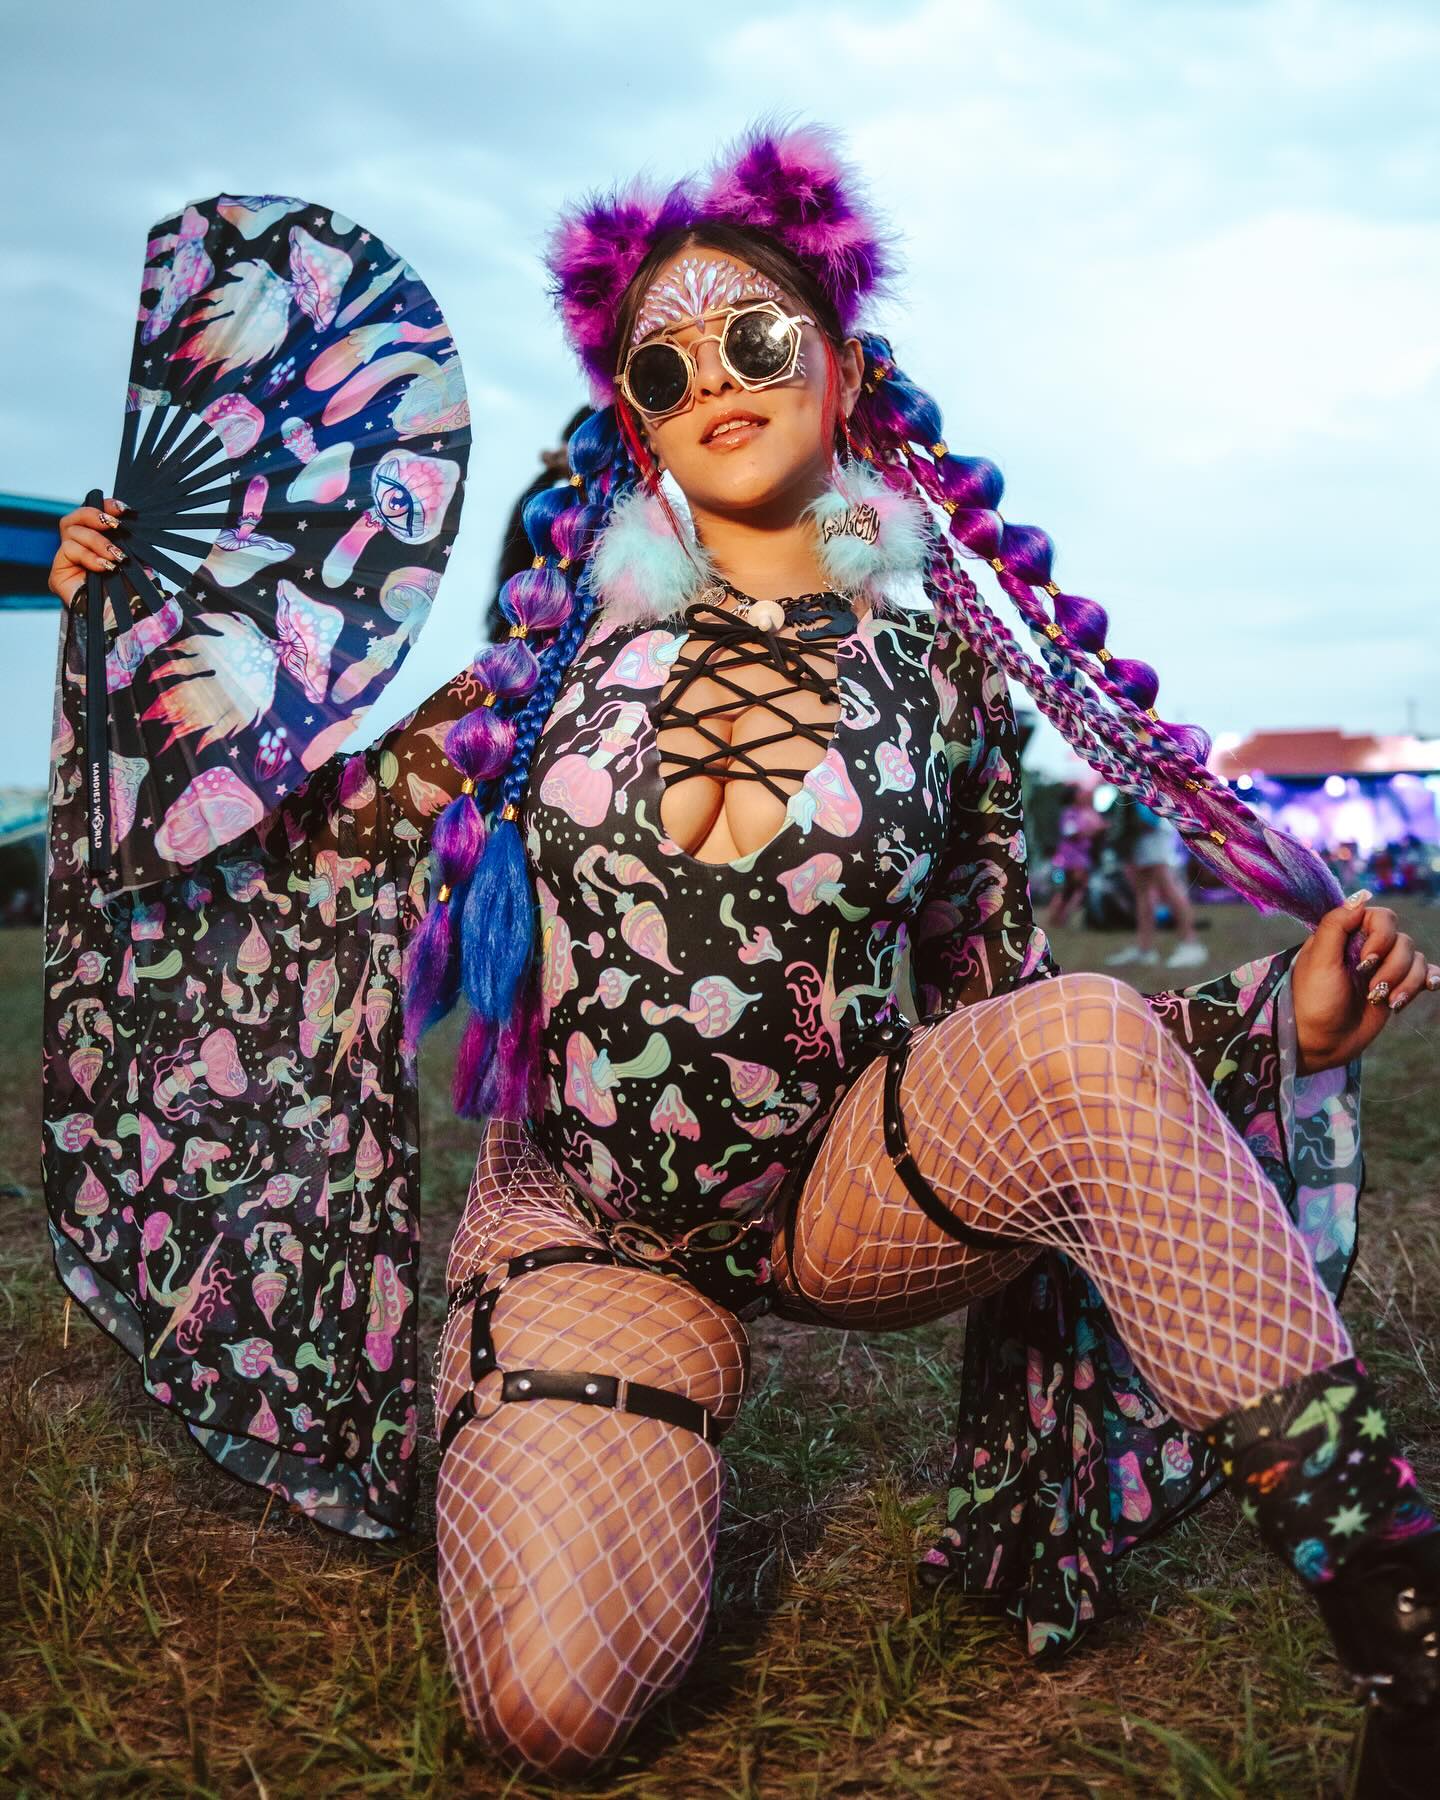 excited rave girl in a purple mushroom rave outfit with a matching fan and fluffy ear accessories and braids kneels in festival grounds